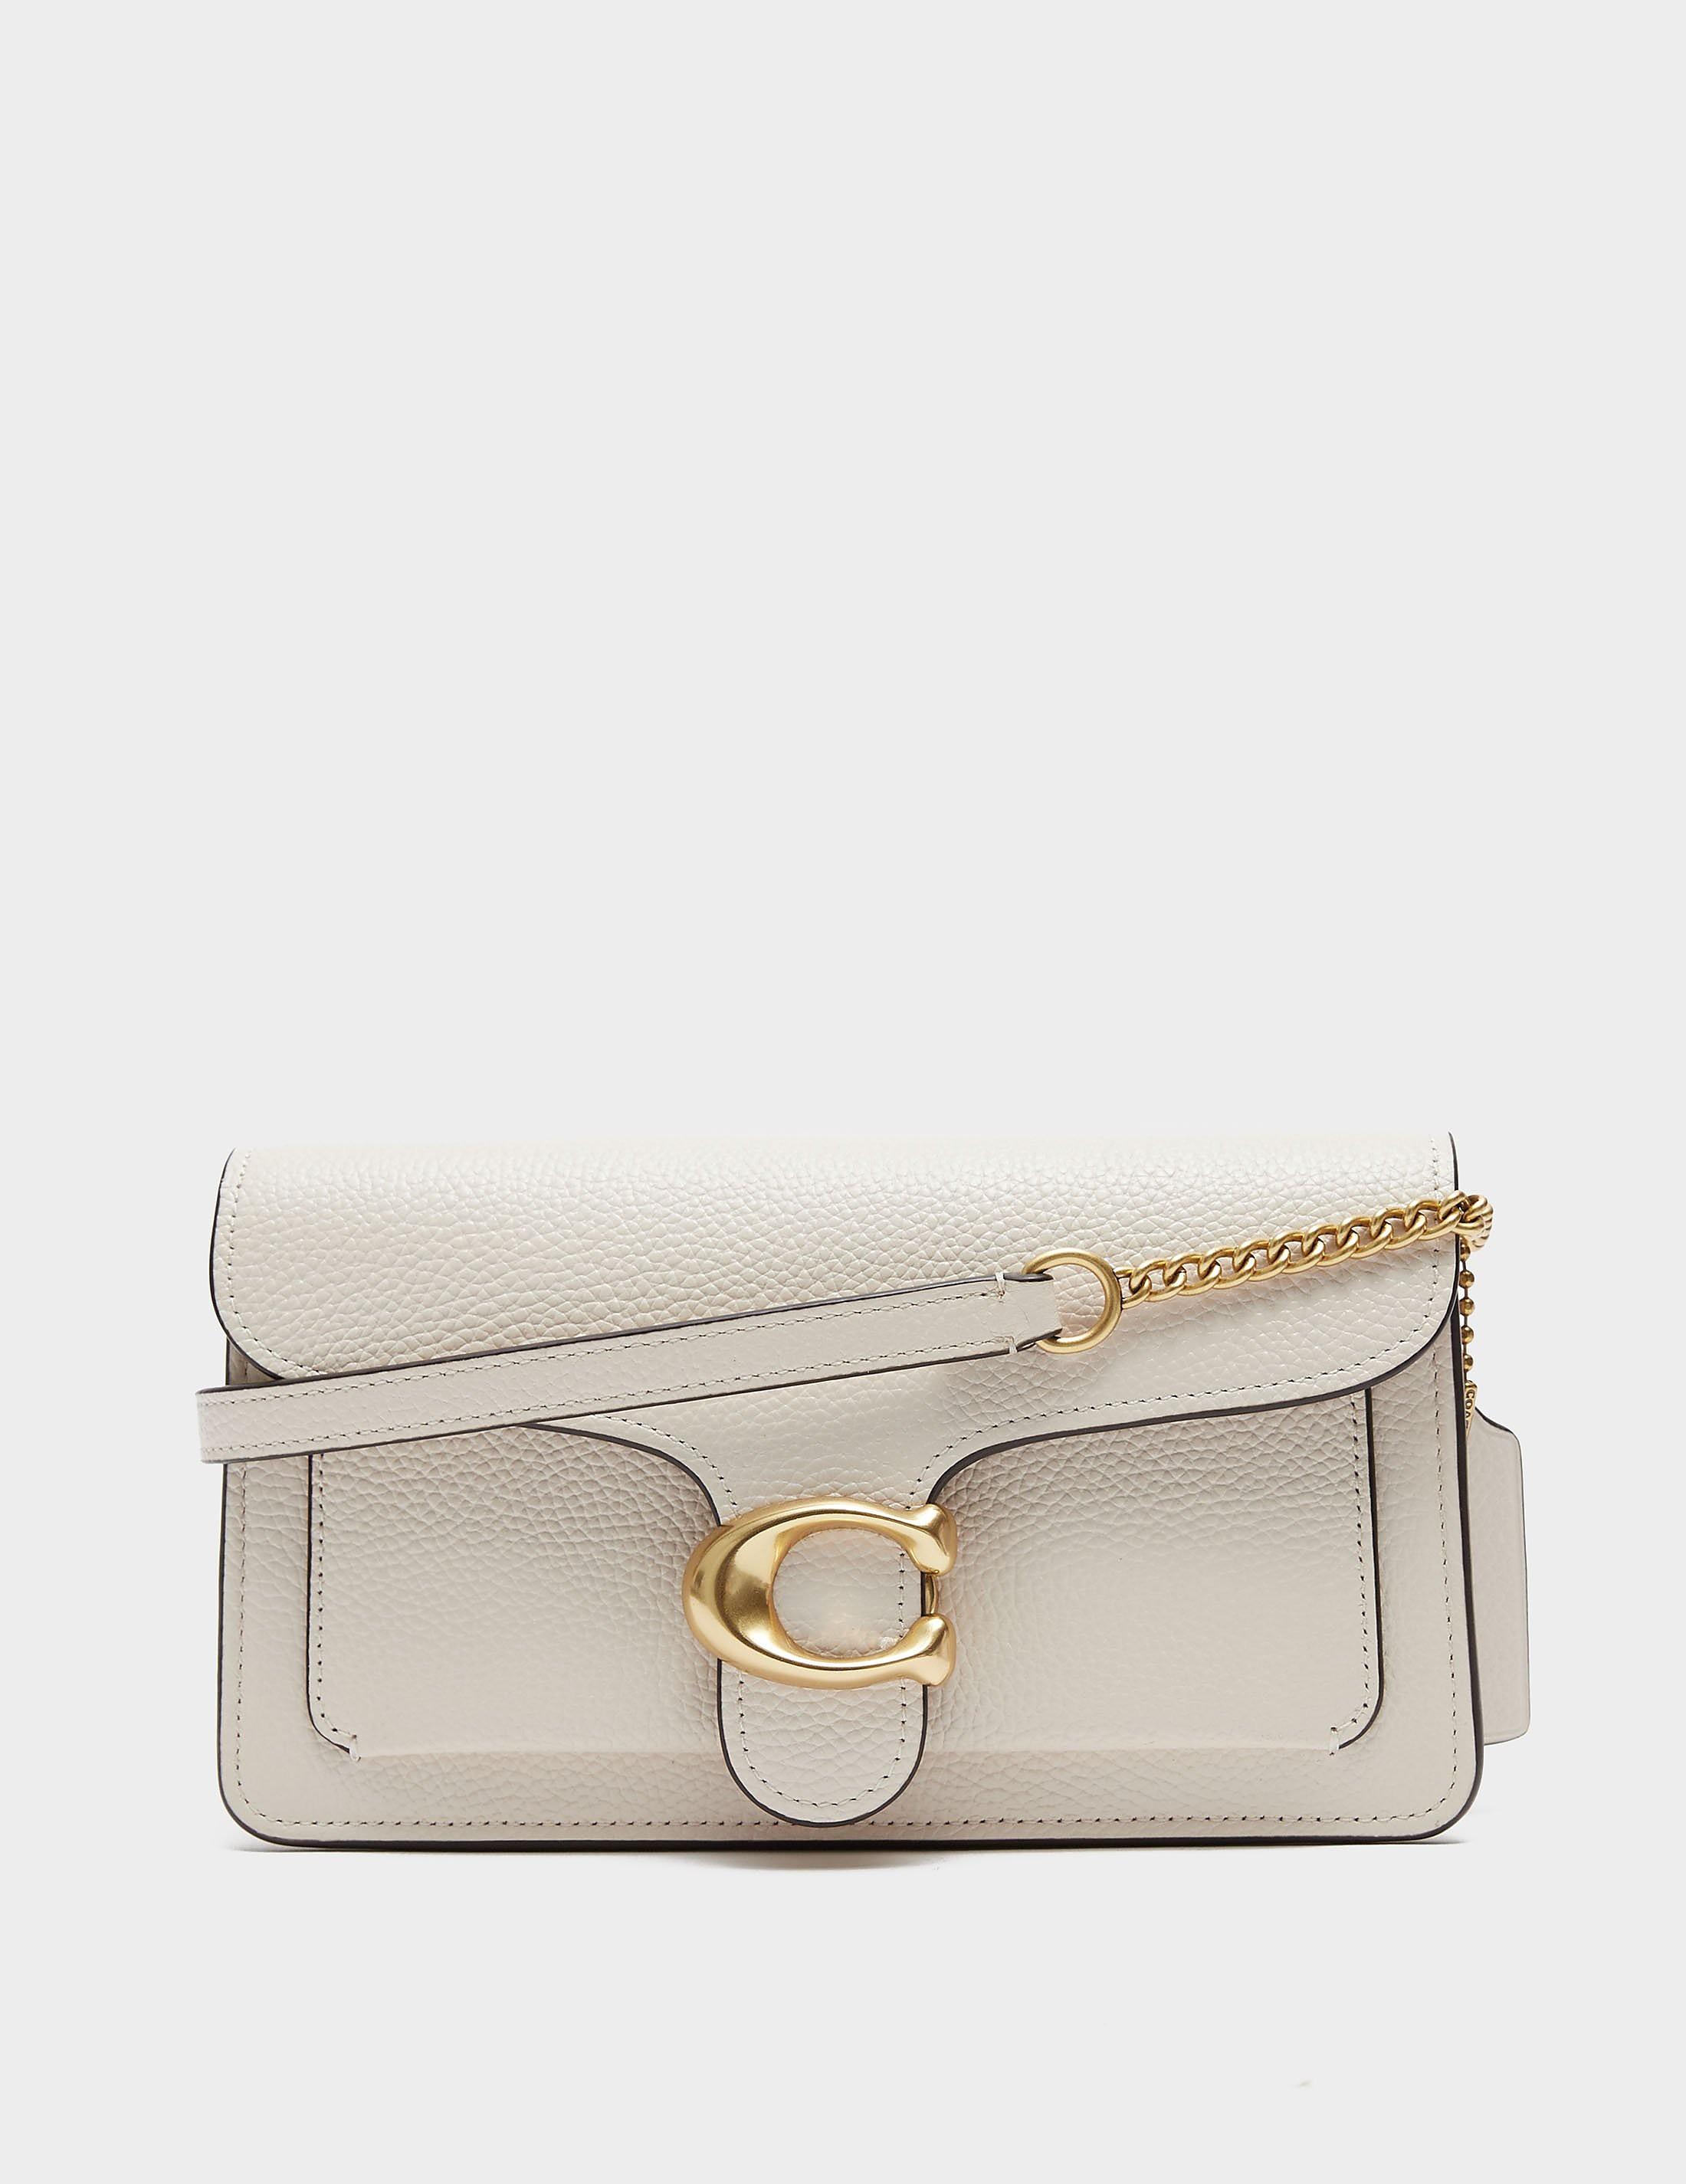 COACH Tabby Chain Clutch Bag in Natural | Lyst